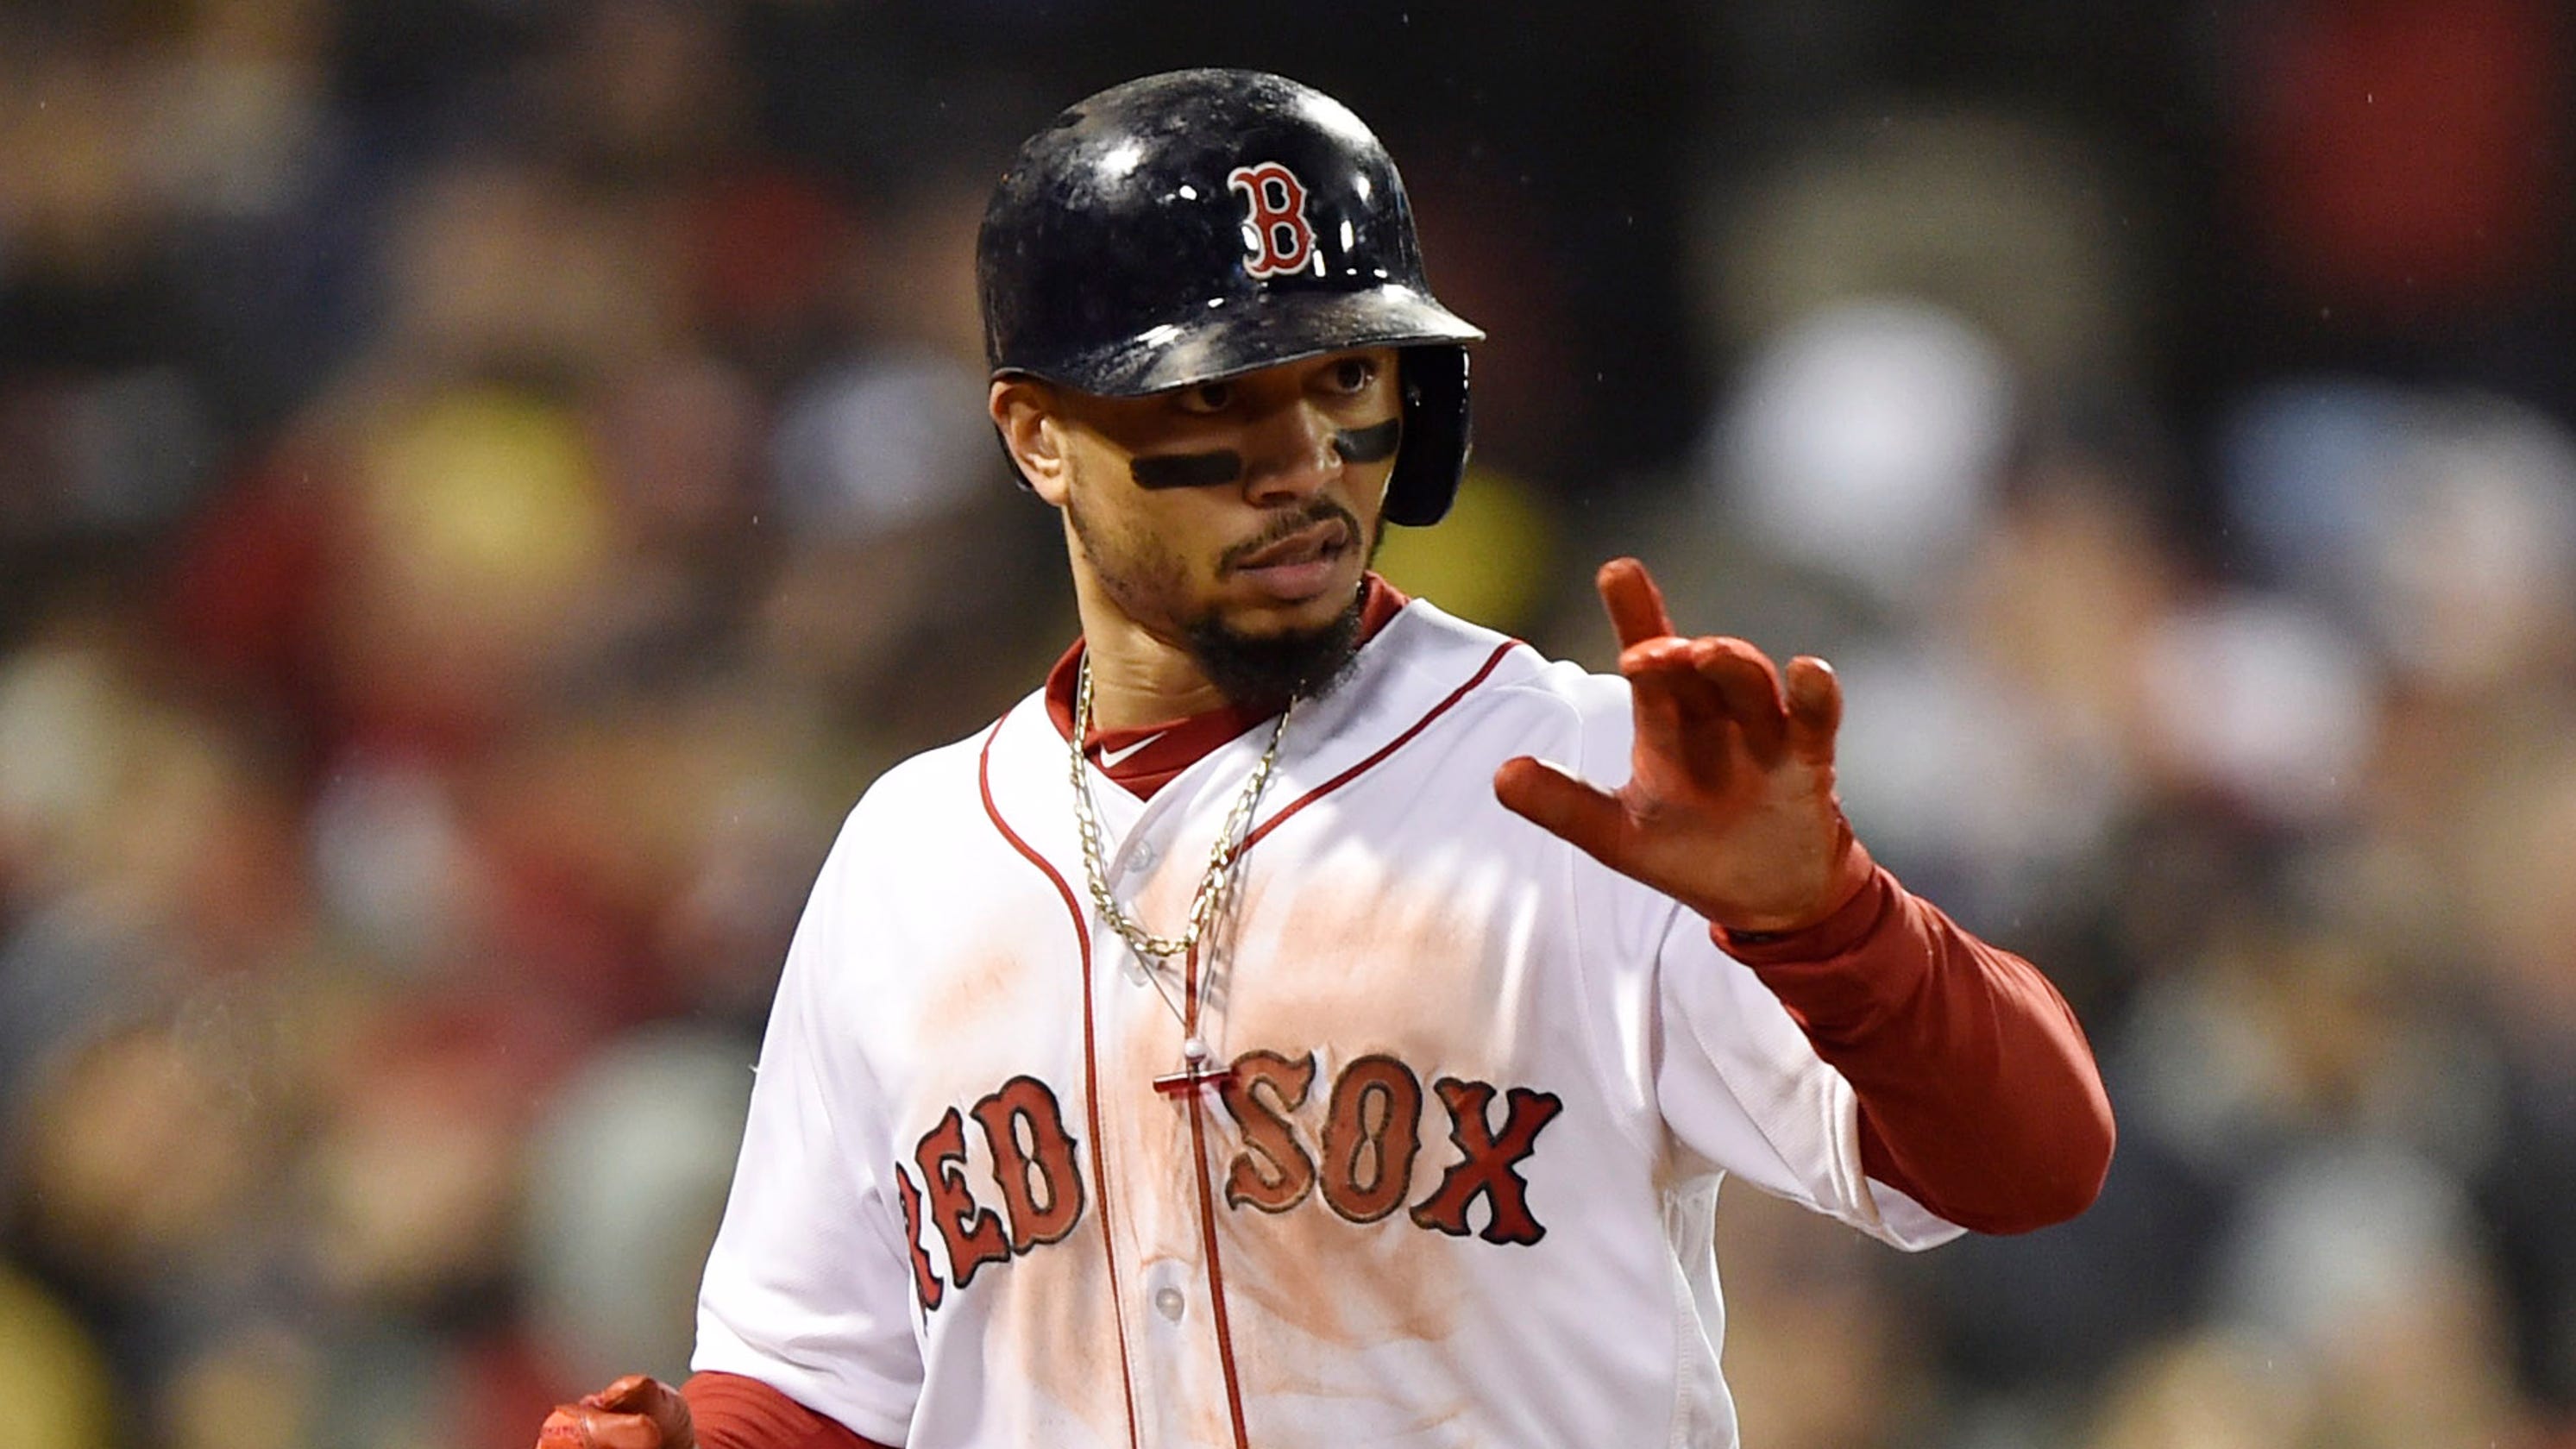 Mookie Betts, Red Sox avoid arbitration with record $20 million deal2986 x 1680